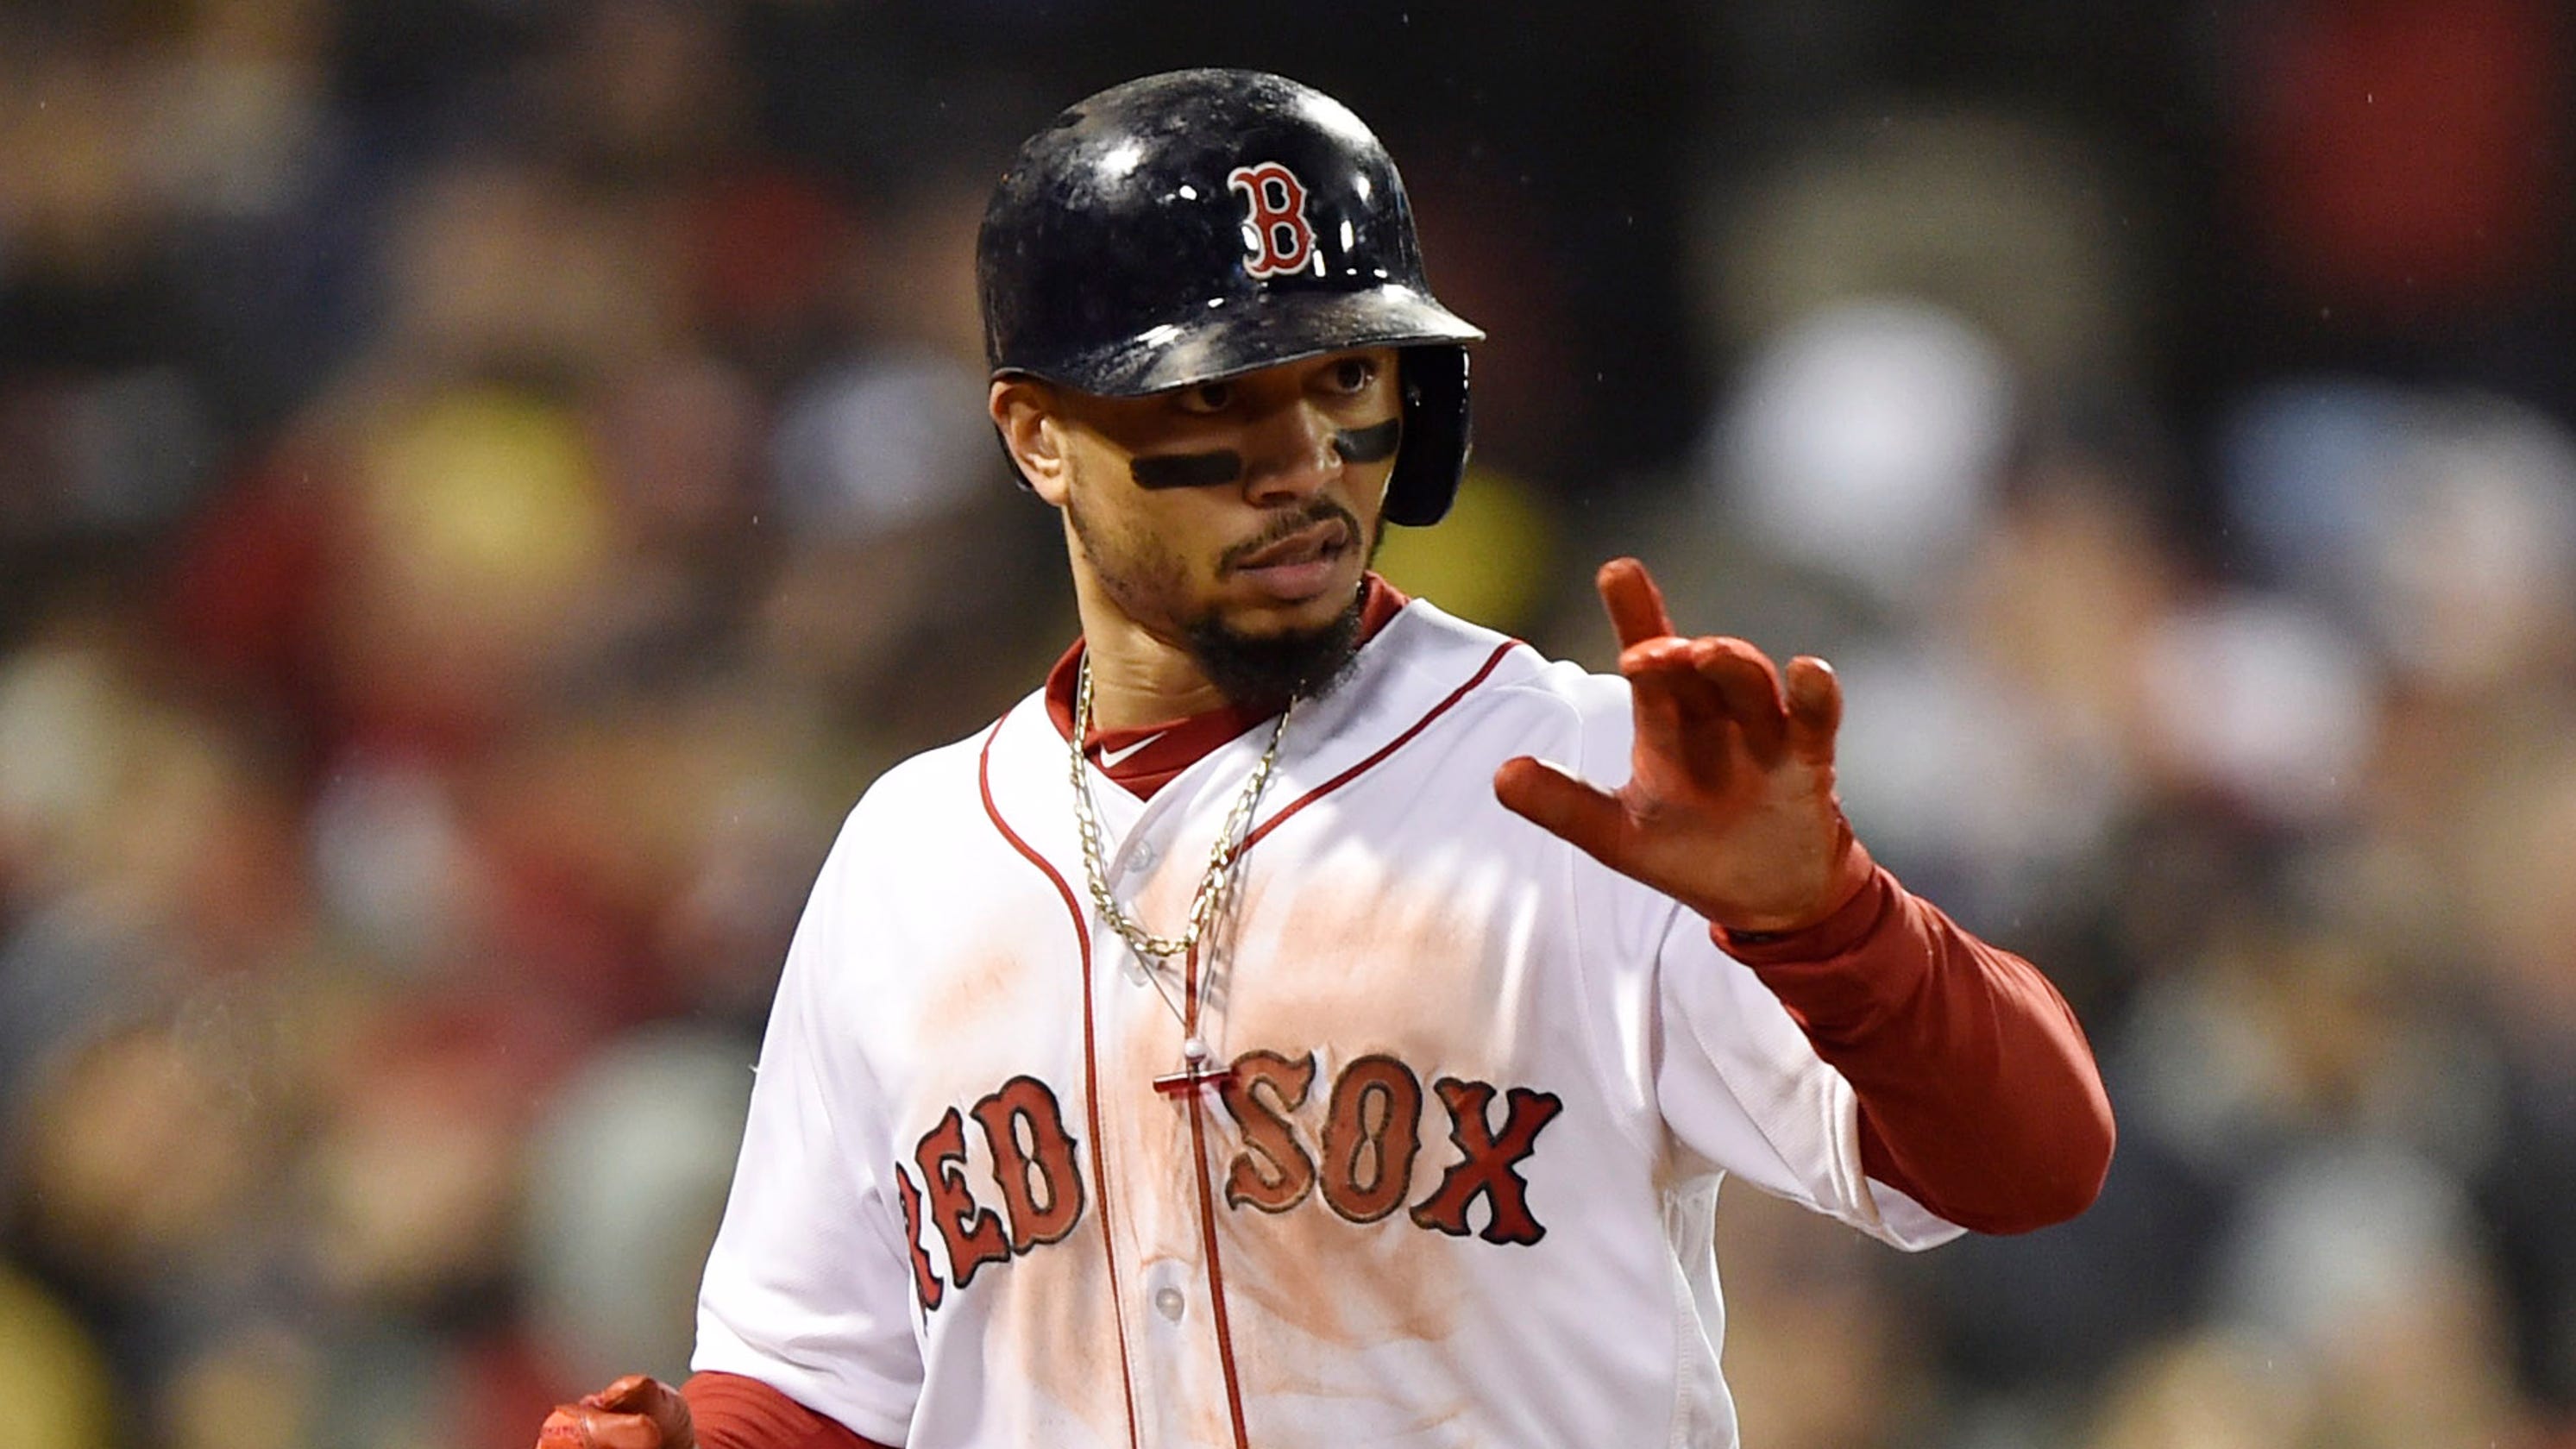 Mookie Betts, Red Sox avoid arbitration with record $20 million deal2986 x 1680